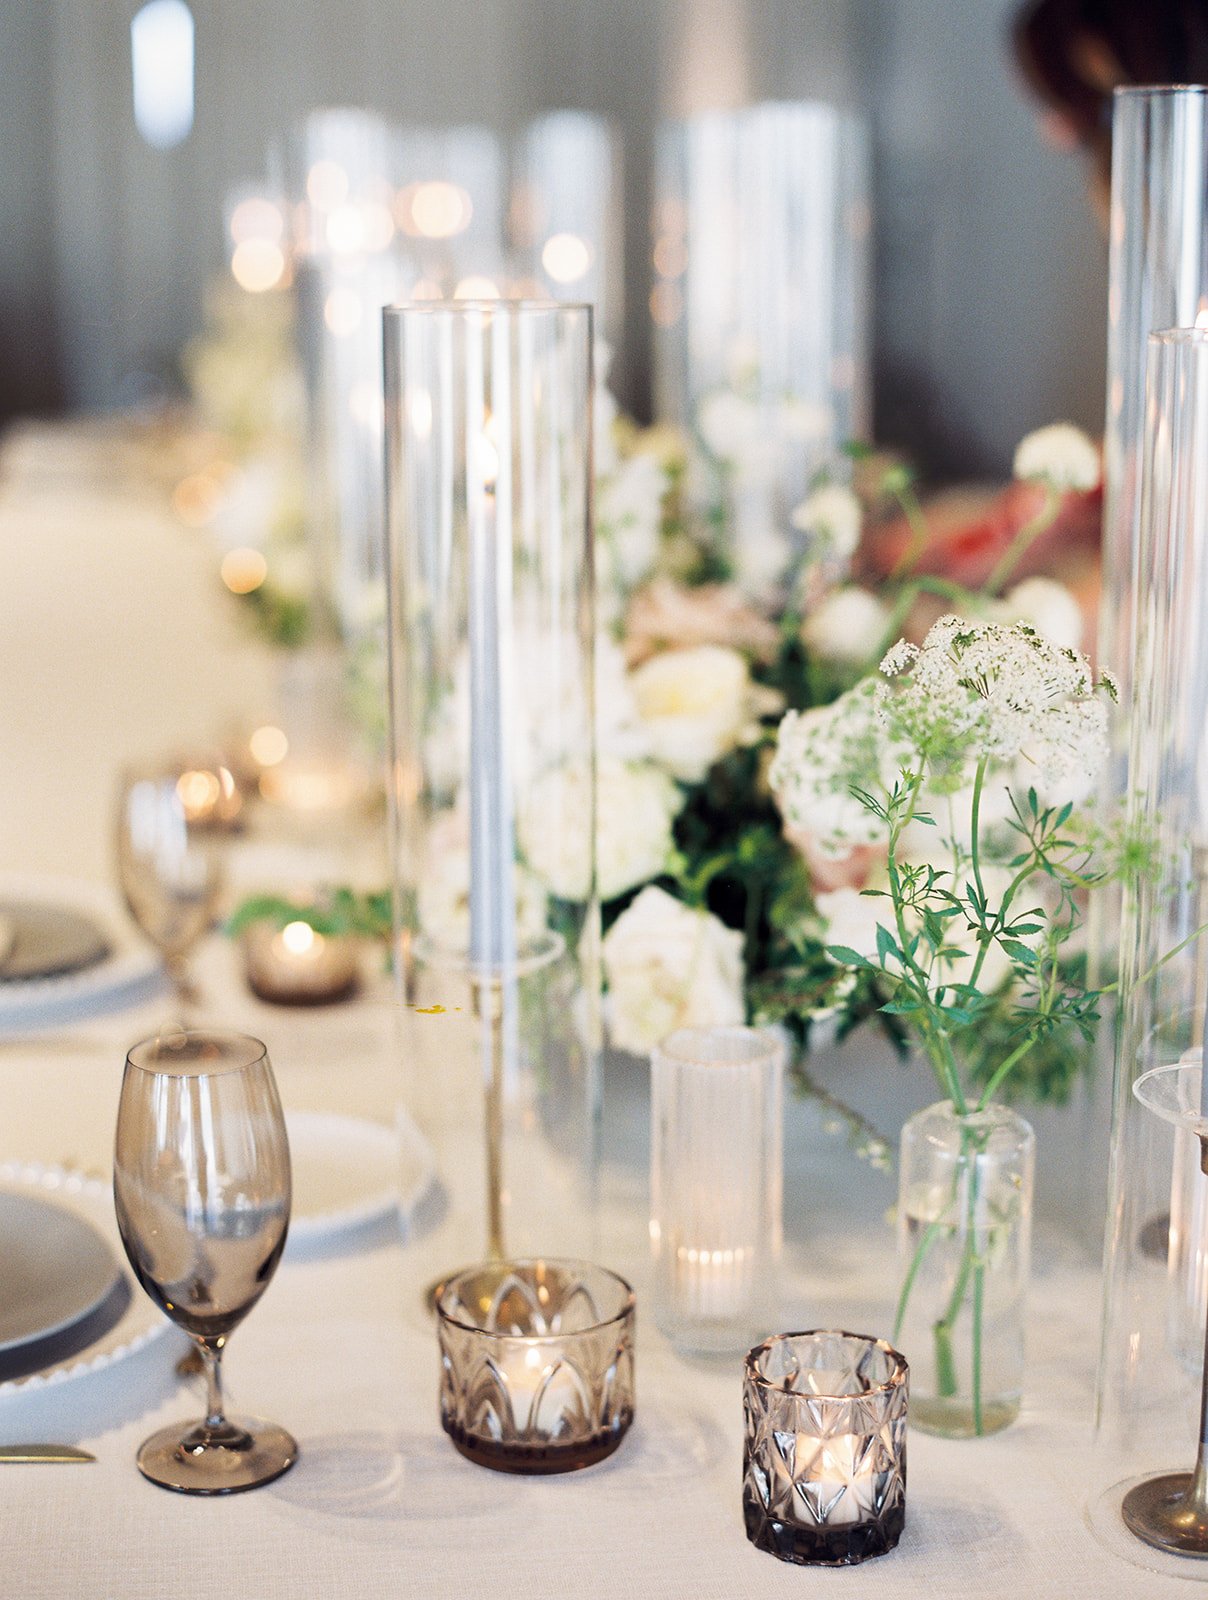 Elegant bud vases with florals of roses, ranunculus, sweet peas, Queen Anne’s lace, butterfly ranunculus in hues of white, cream and blush. Accented with dusty blue tapers and clear glass votives. Designed by Rosemary and Finch in Nashville, TN.